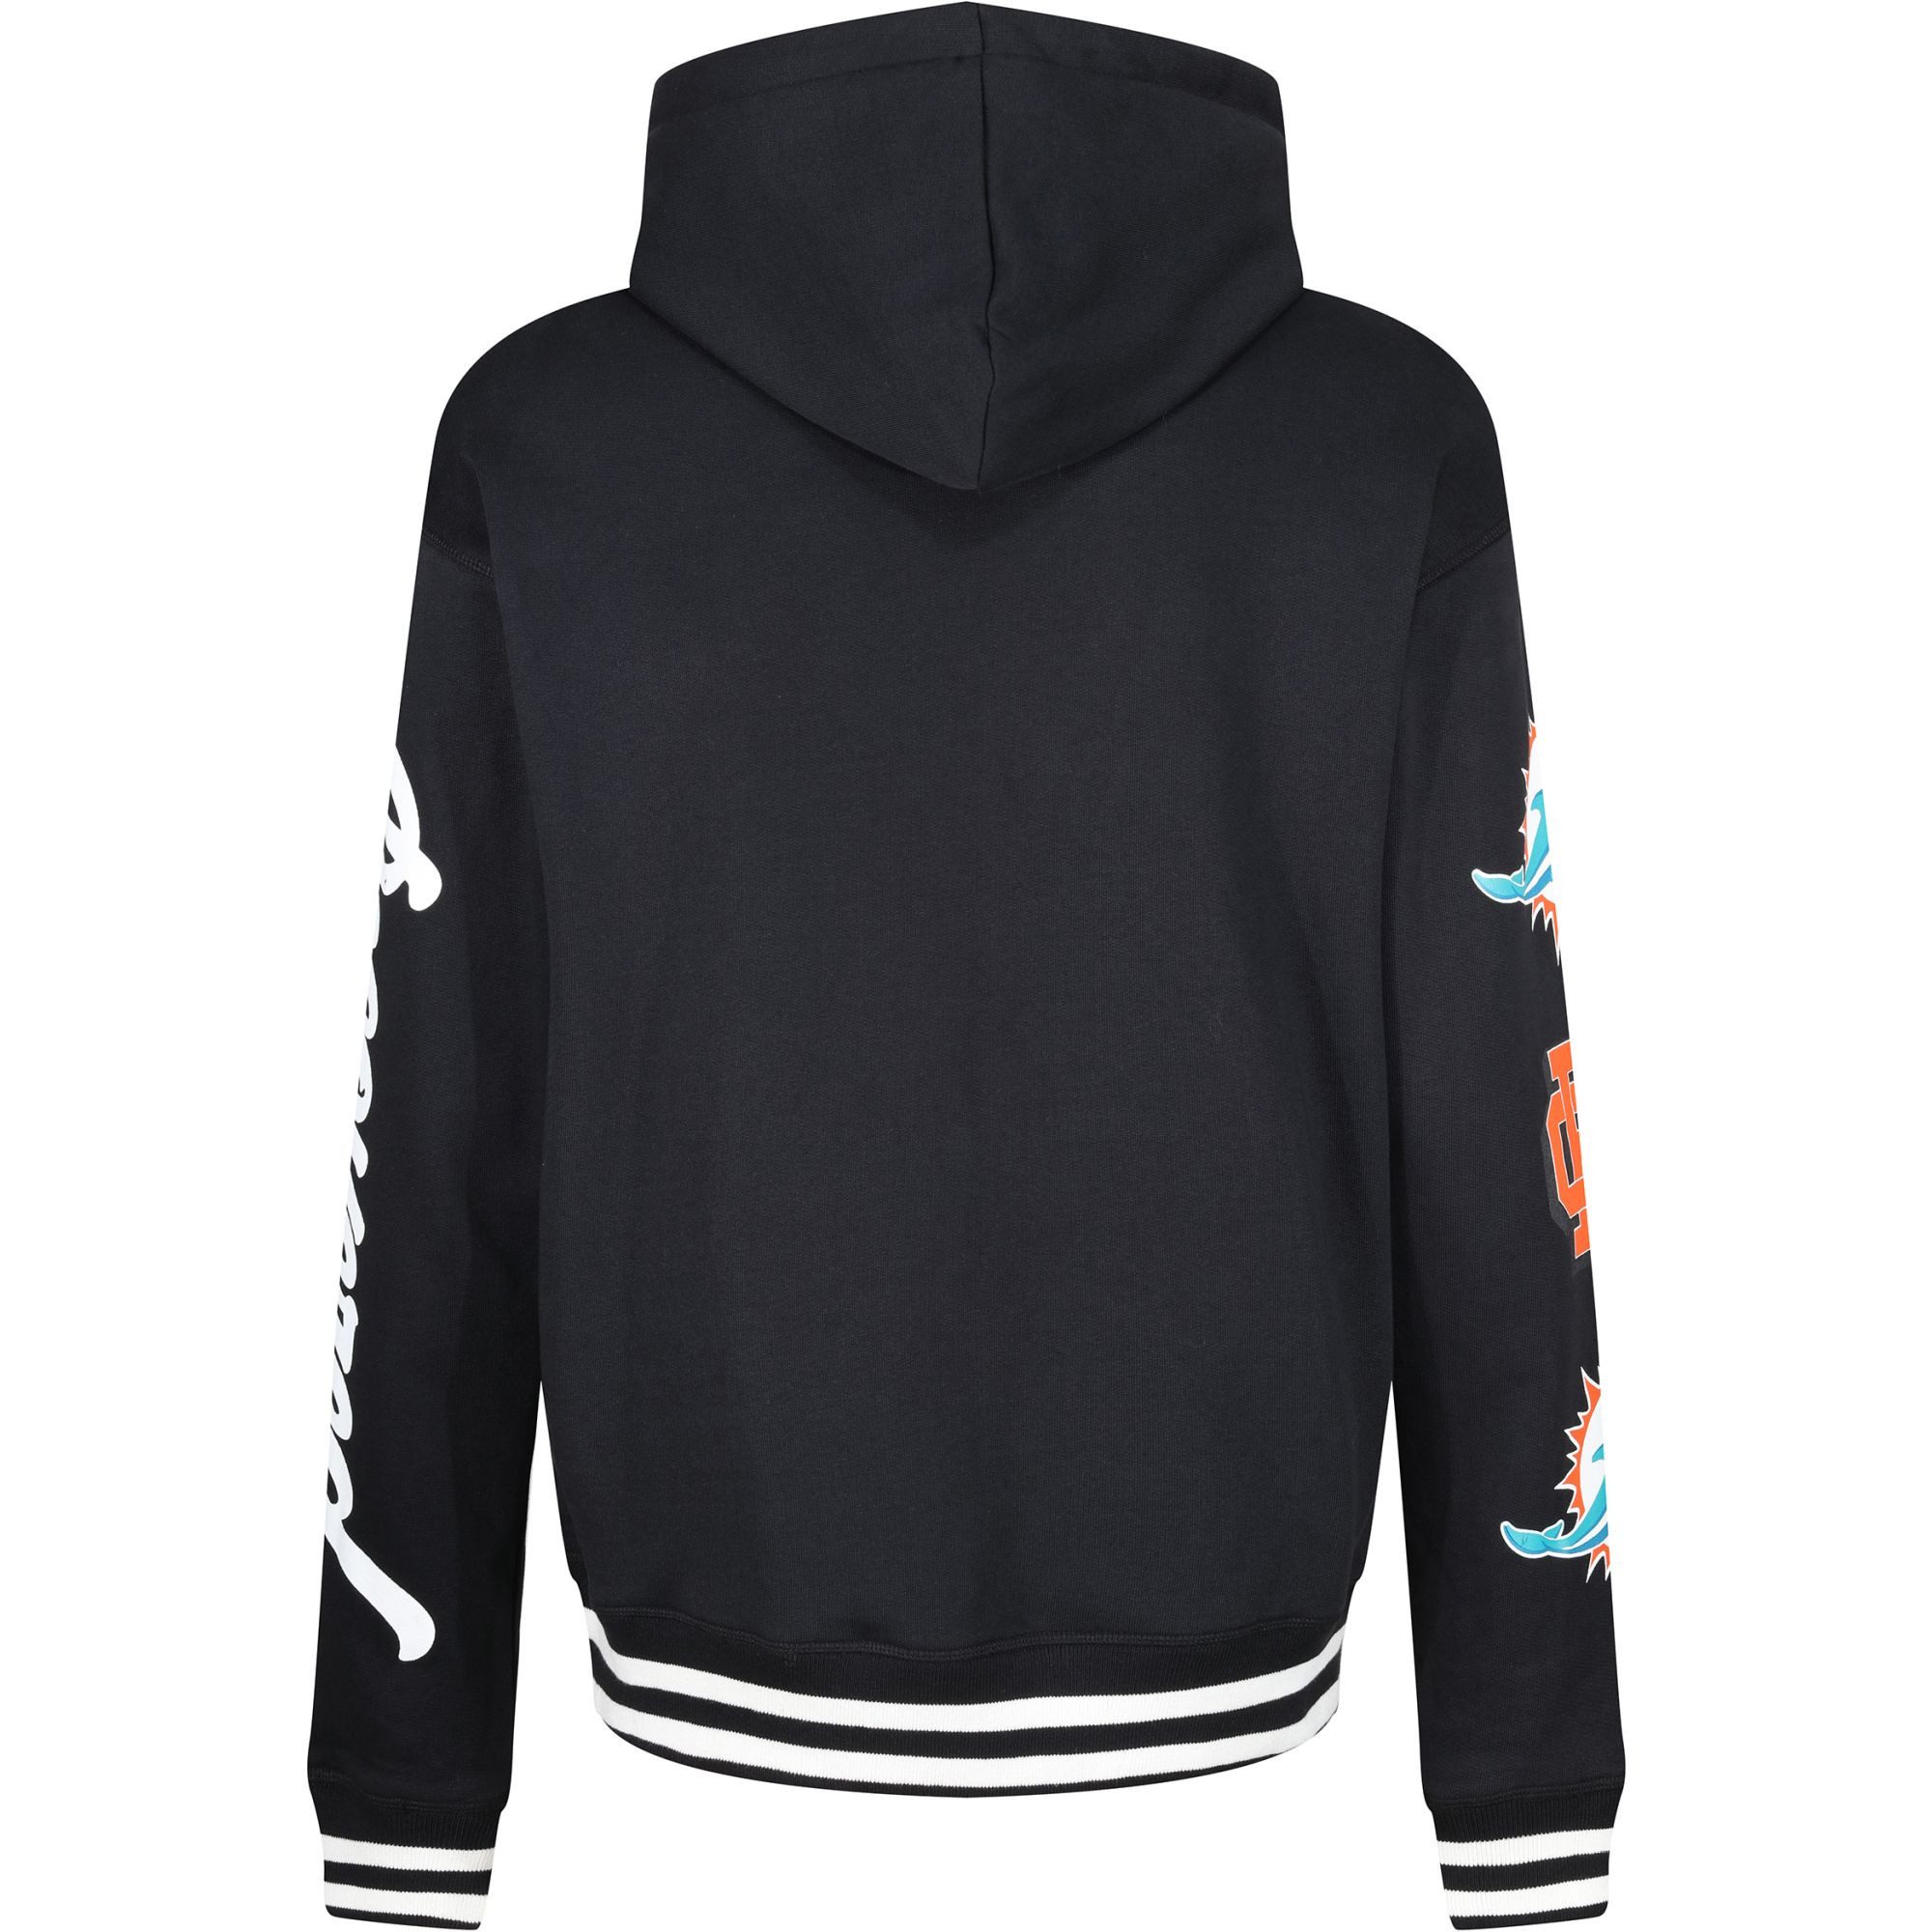 Miami Dolphins NFL Go Fins Hoody Black Recovered